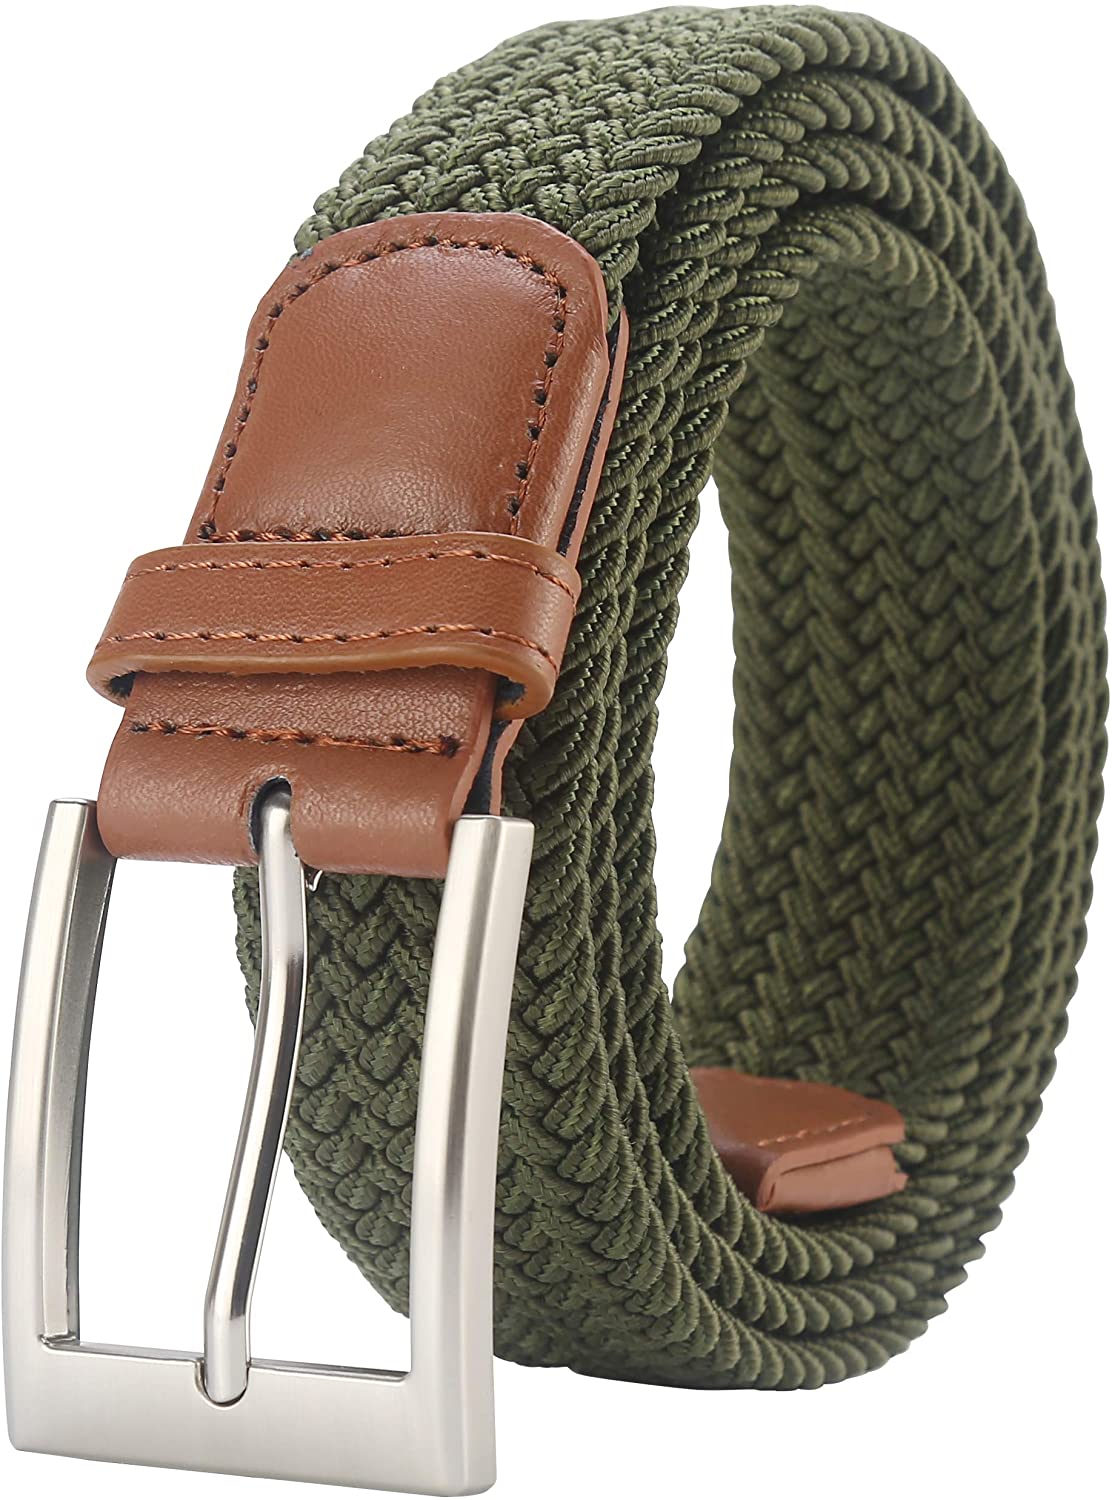 Lavemi Mens Belt, Leather Woven Braided Belts for India